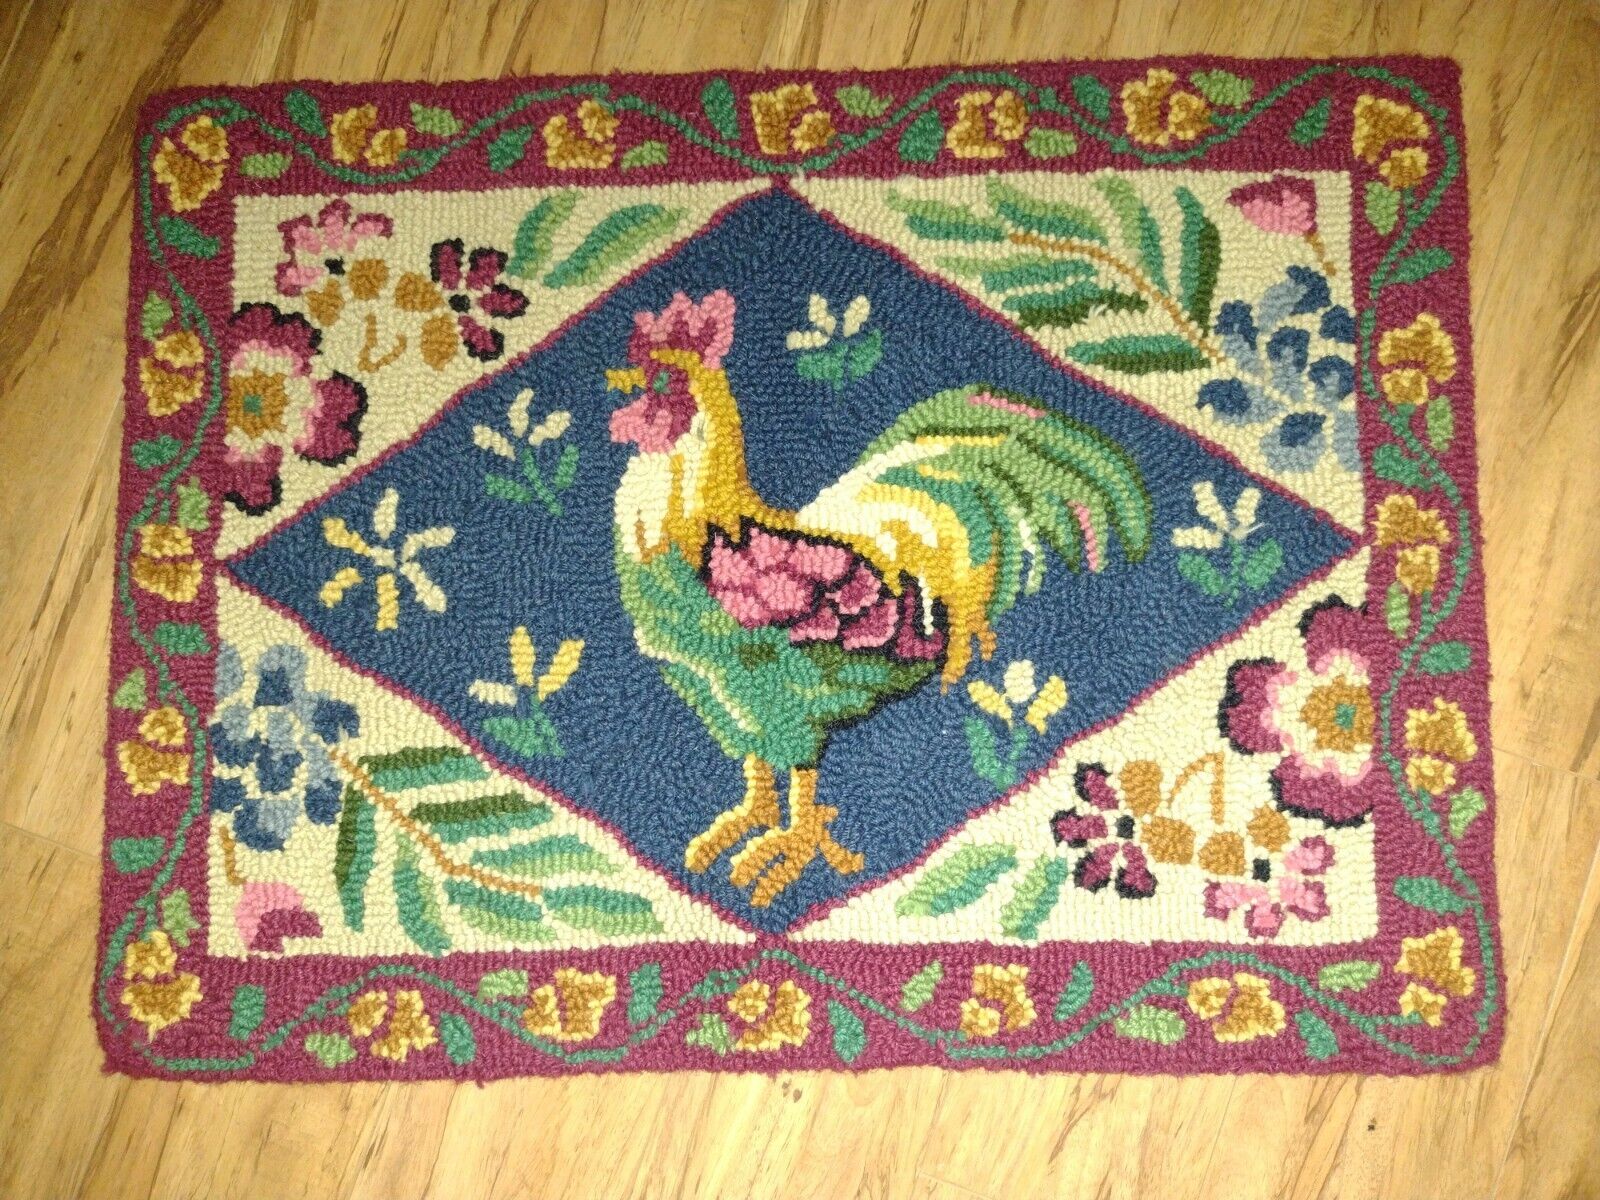 Vintage Hand Hooked Rooster Wool Rug Mat Floral 25" x 19" Vibrant Multi Colors